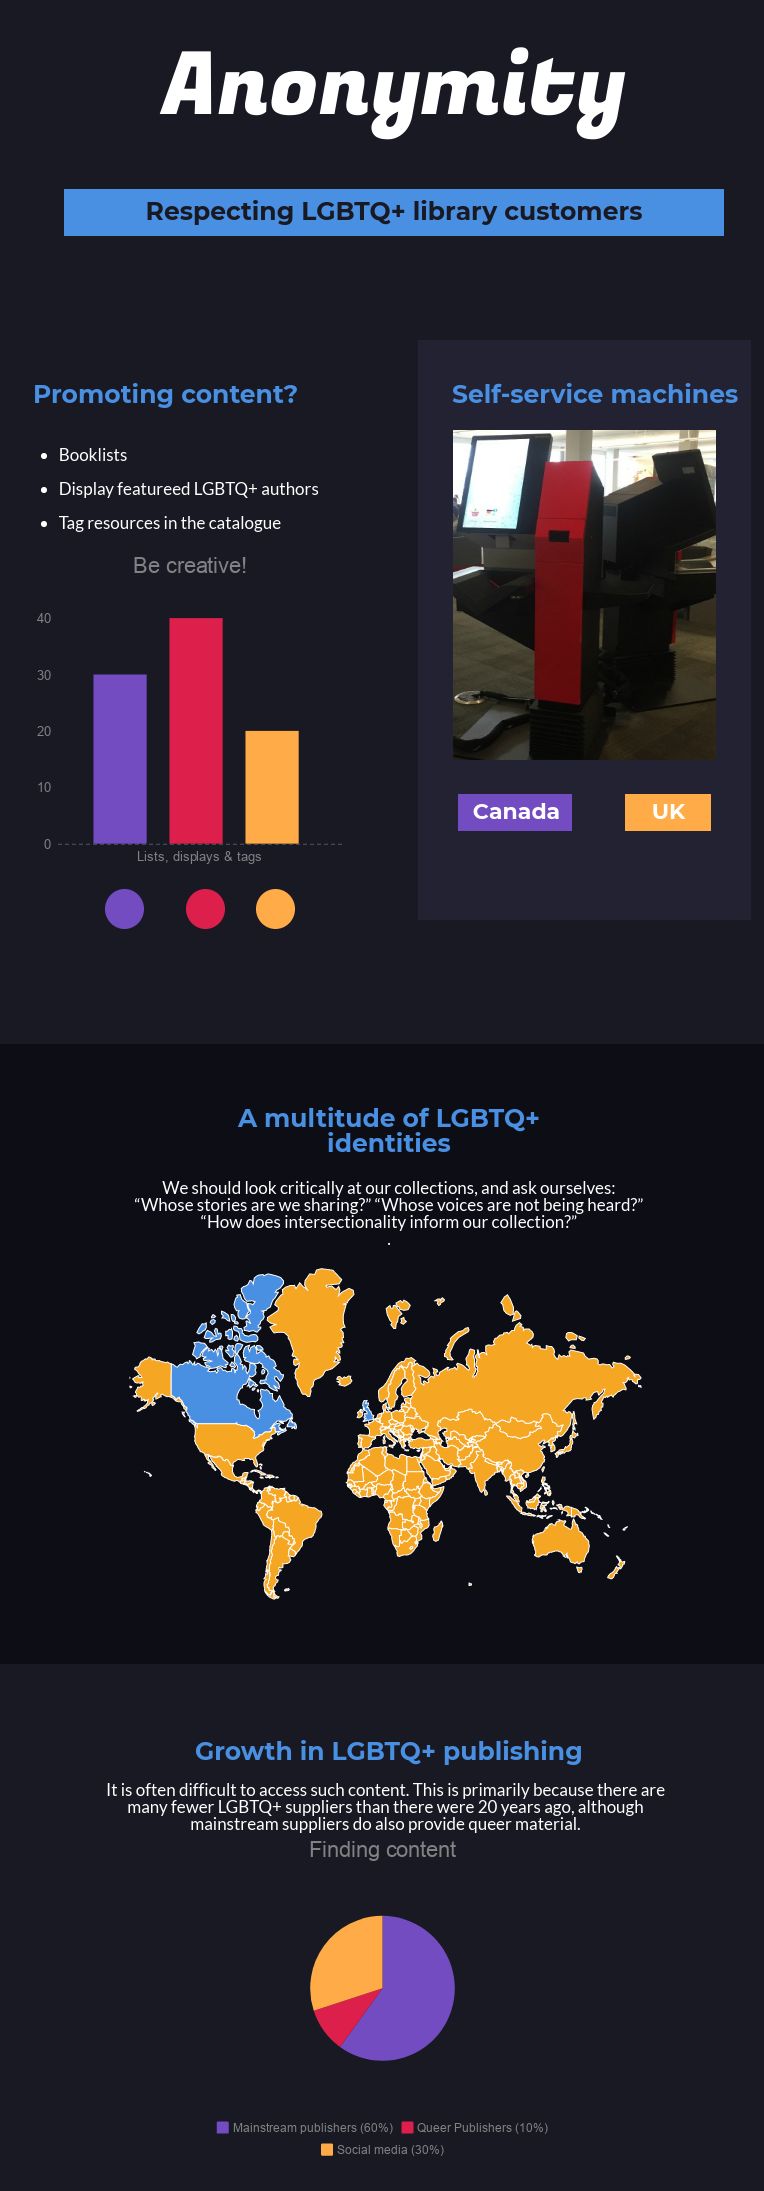 Infographic of ideas for respecting the anonymity of LGBTQ+ customers